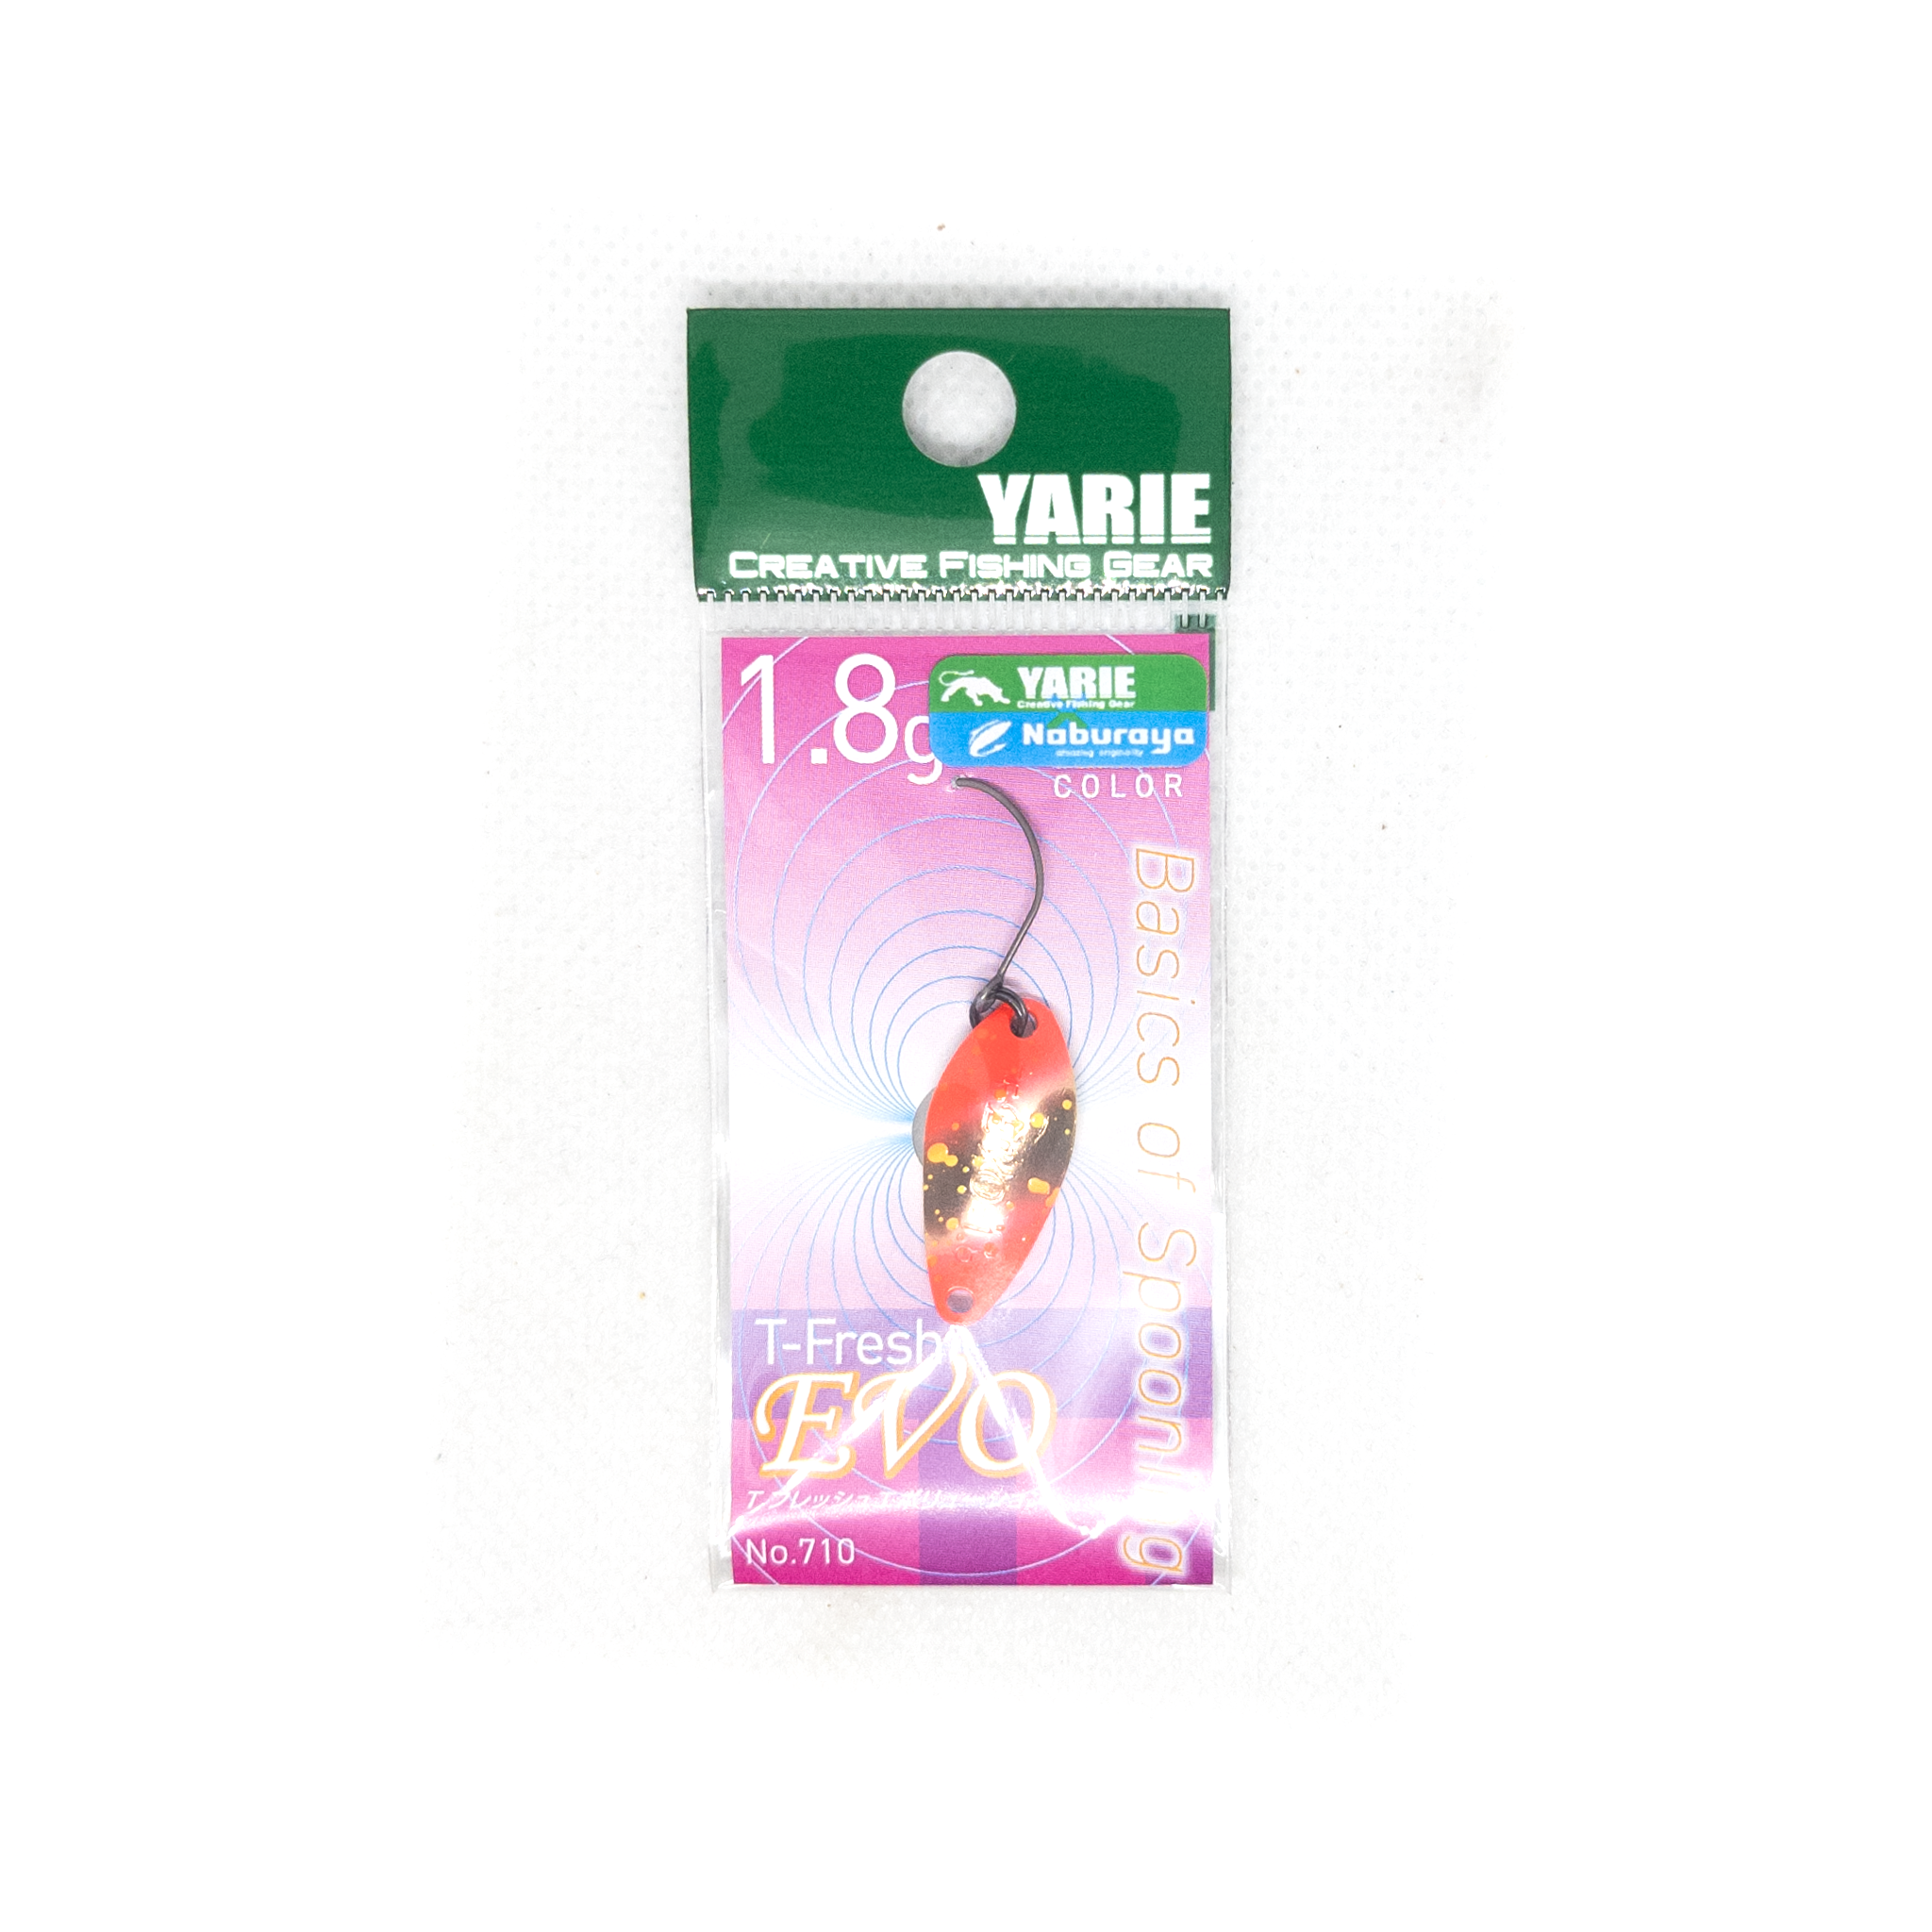 YARIE T-Fresh Evo Trout Spoon 1.8g (Naburaya x Yarie) Color Split Red [Limited Special]